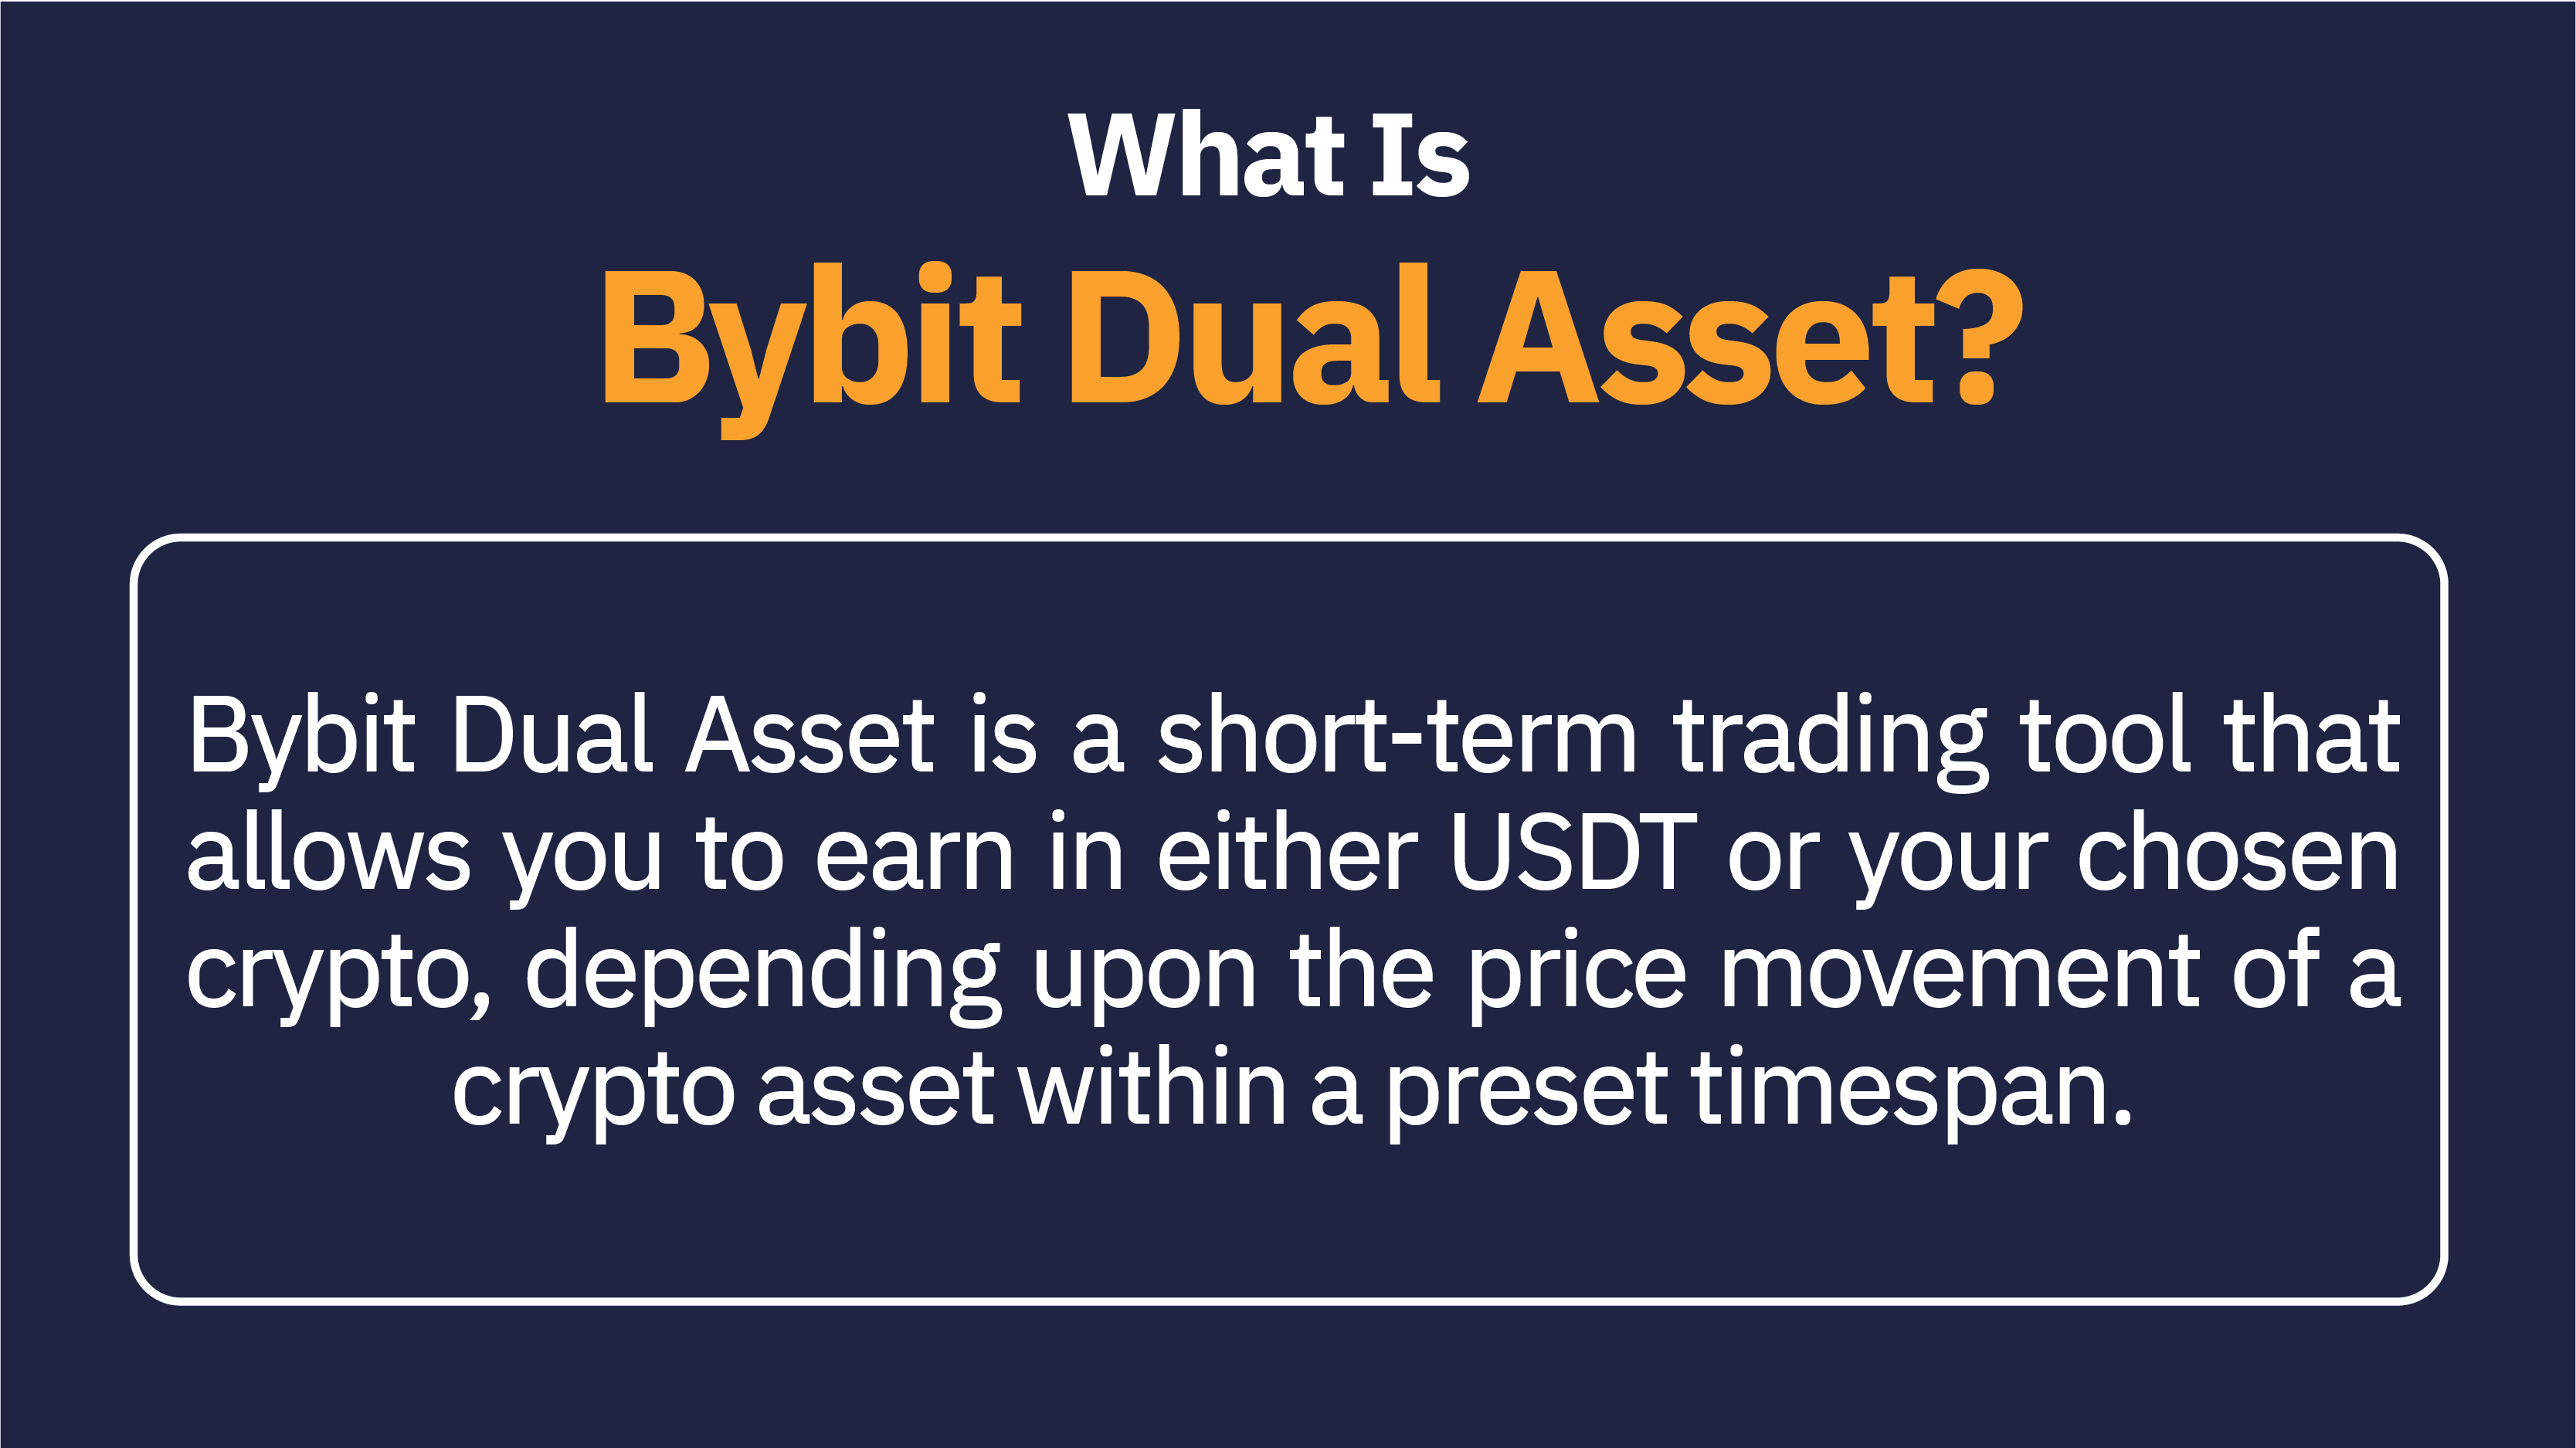 Bybit Dual Asset is a short-term trading tool that allows you to earn in either USDT or your chosen crypto, depending upon the price movement of a crypto asset within a preset time